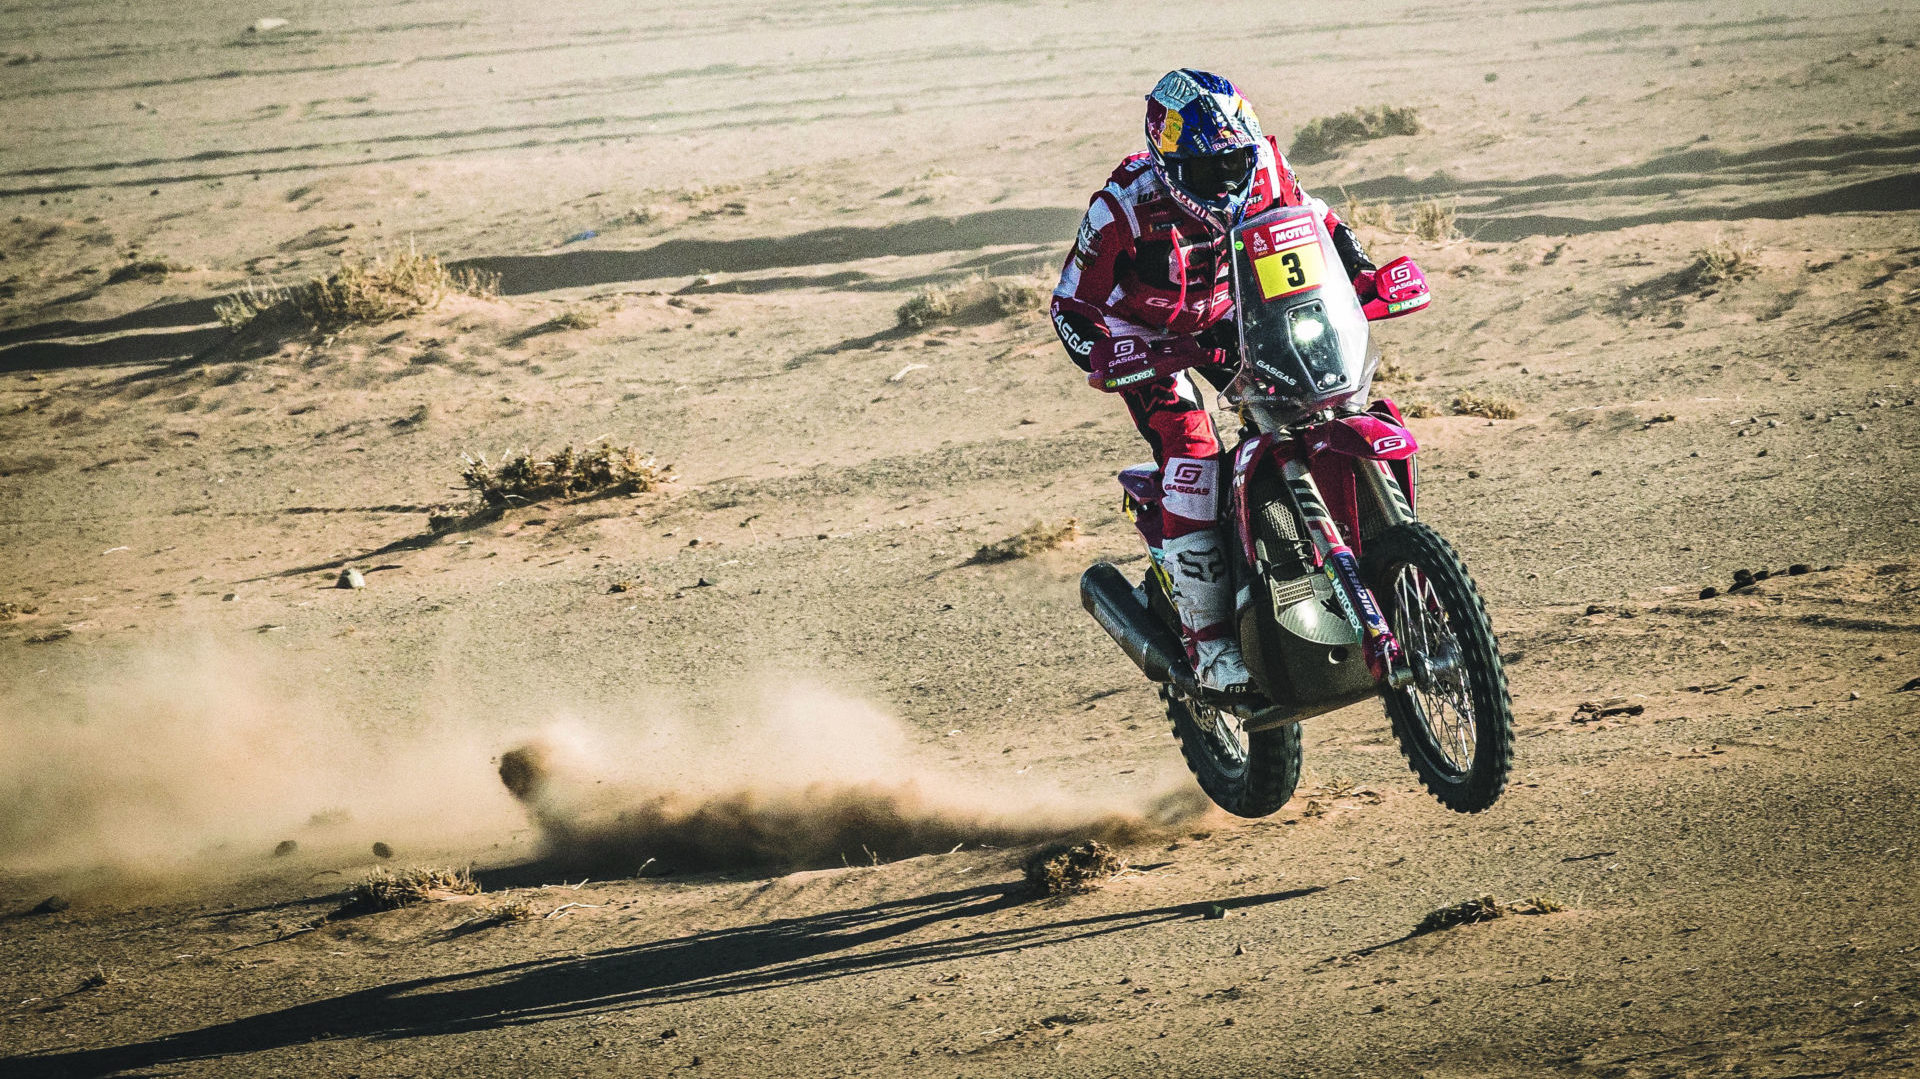 Sam Sunderland (3) in action during Stage Eight of the Dakar Rally Monday in Saudi Arabia. Photo by Rally Zone, courtesy GASGAS Factory Racing.